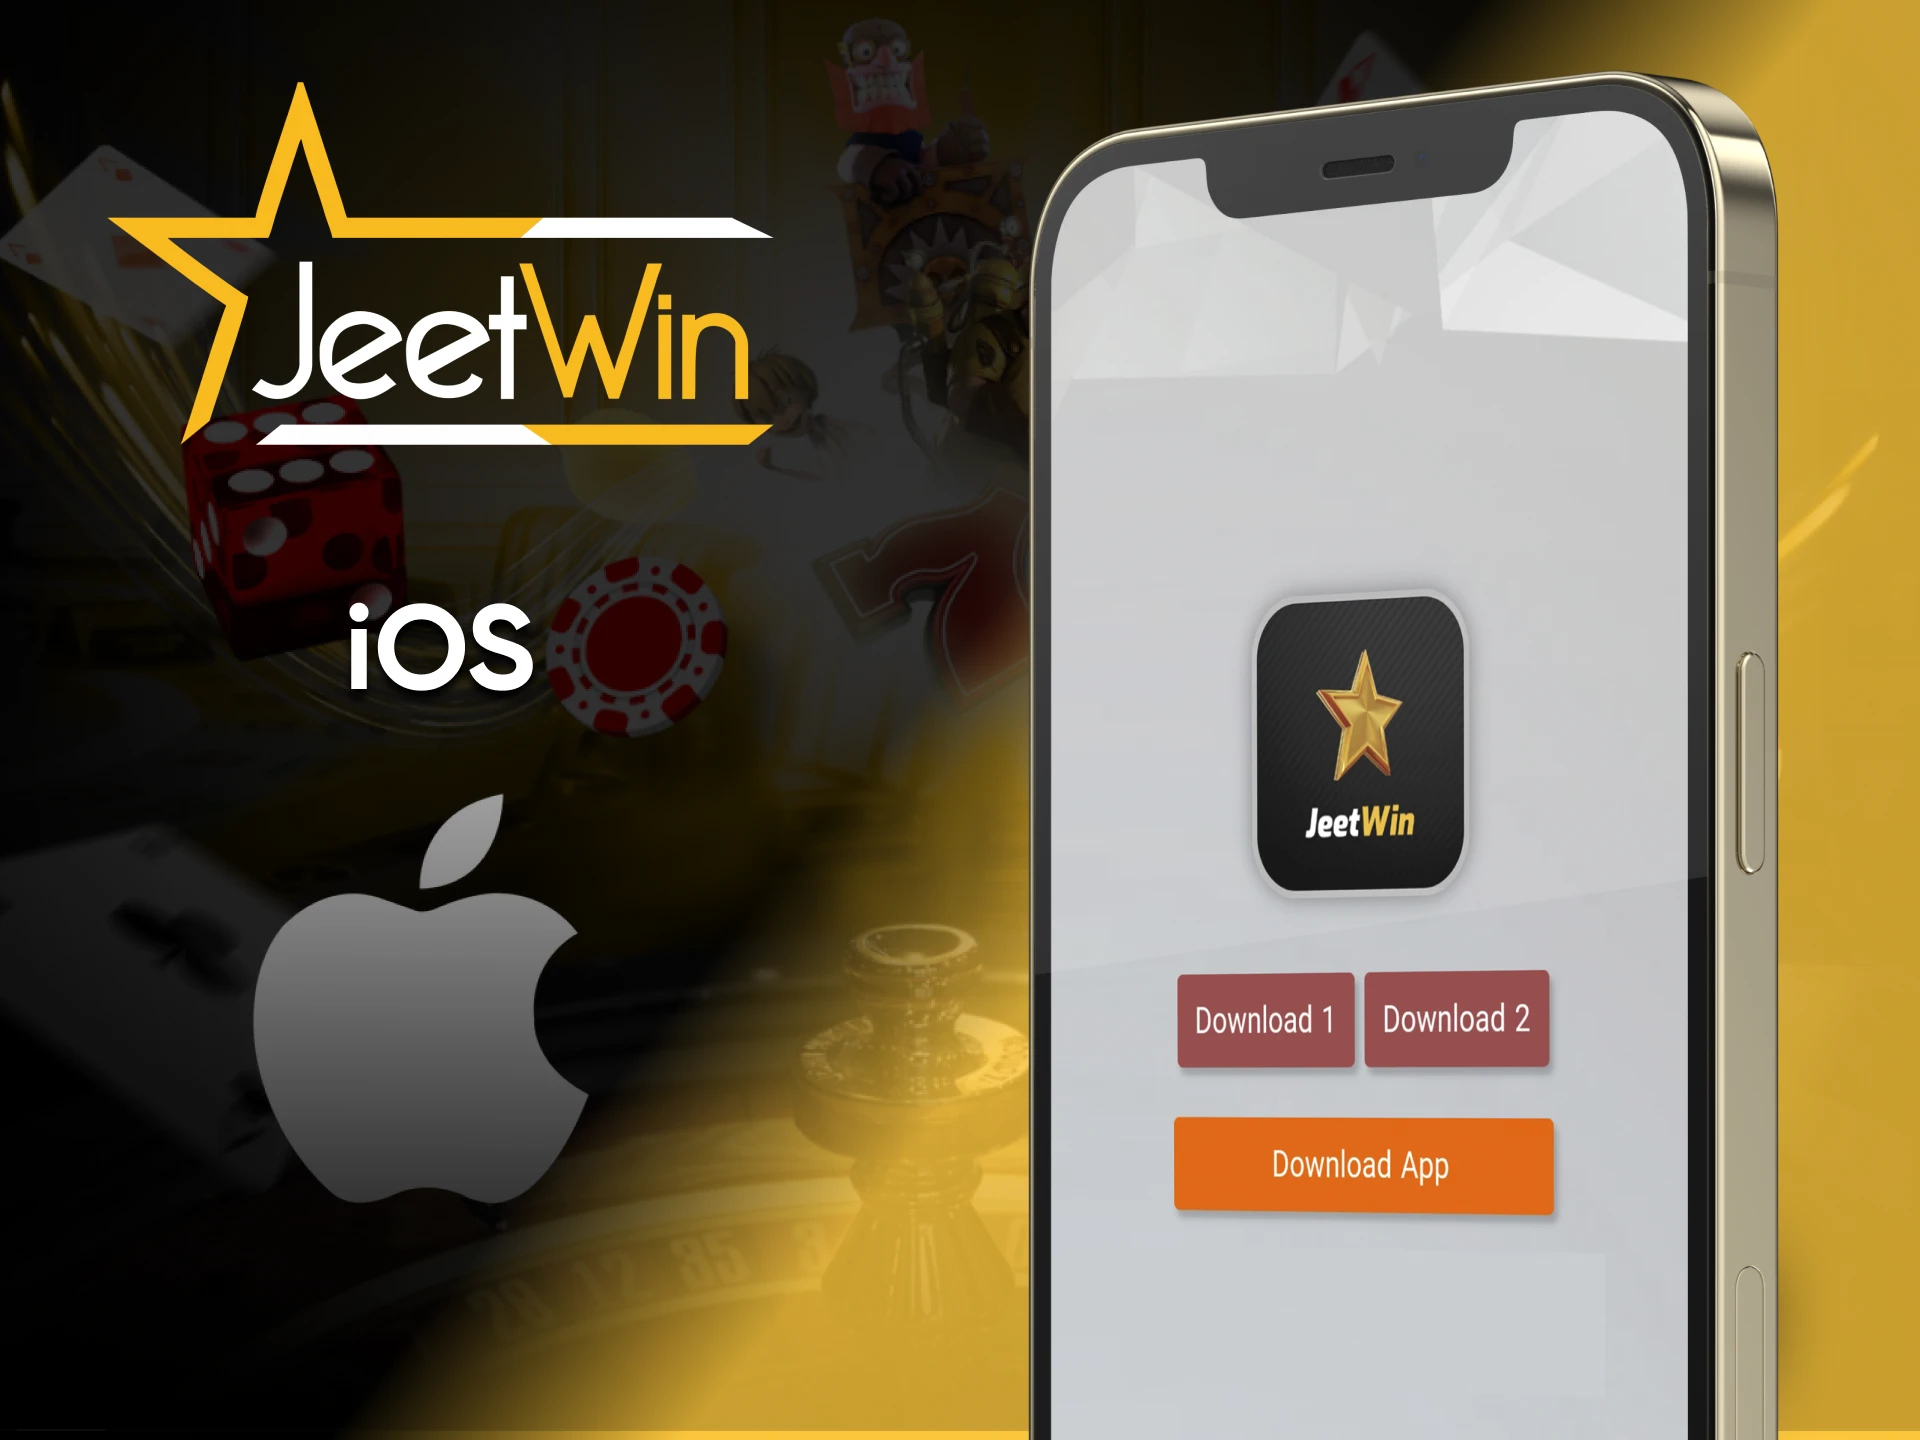 You can play at the Jettwin casino by downloading the application to your iOS device.